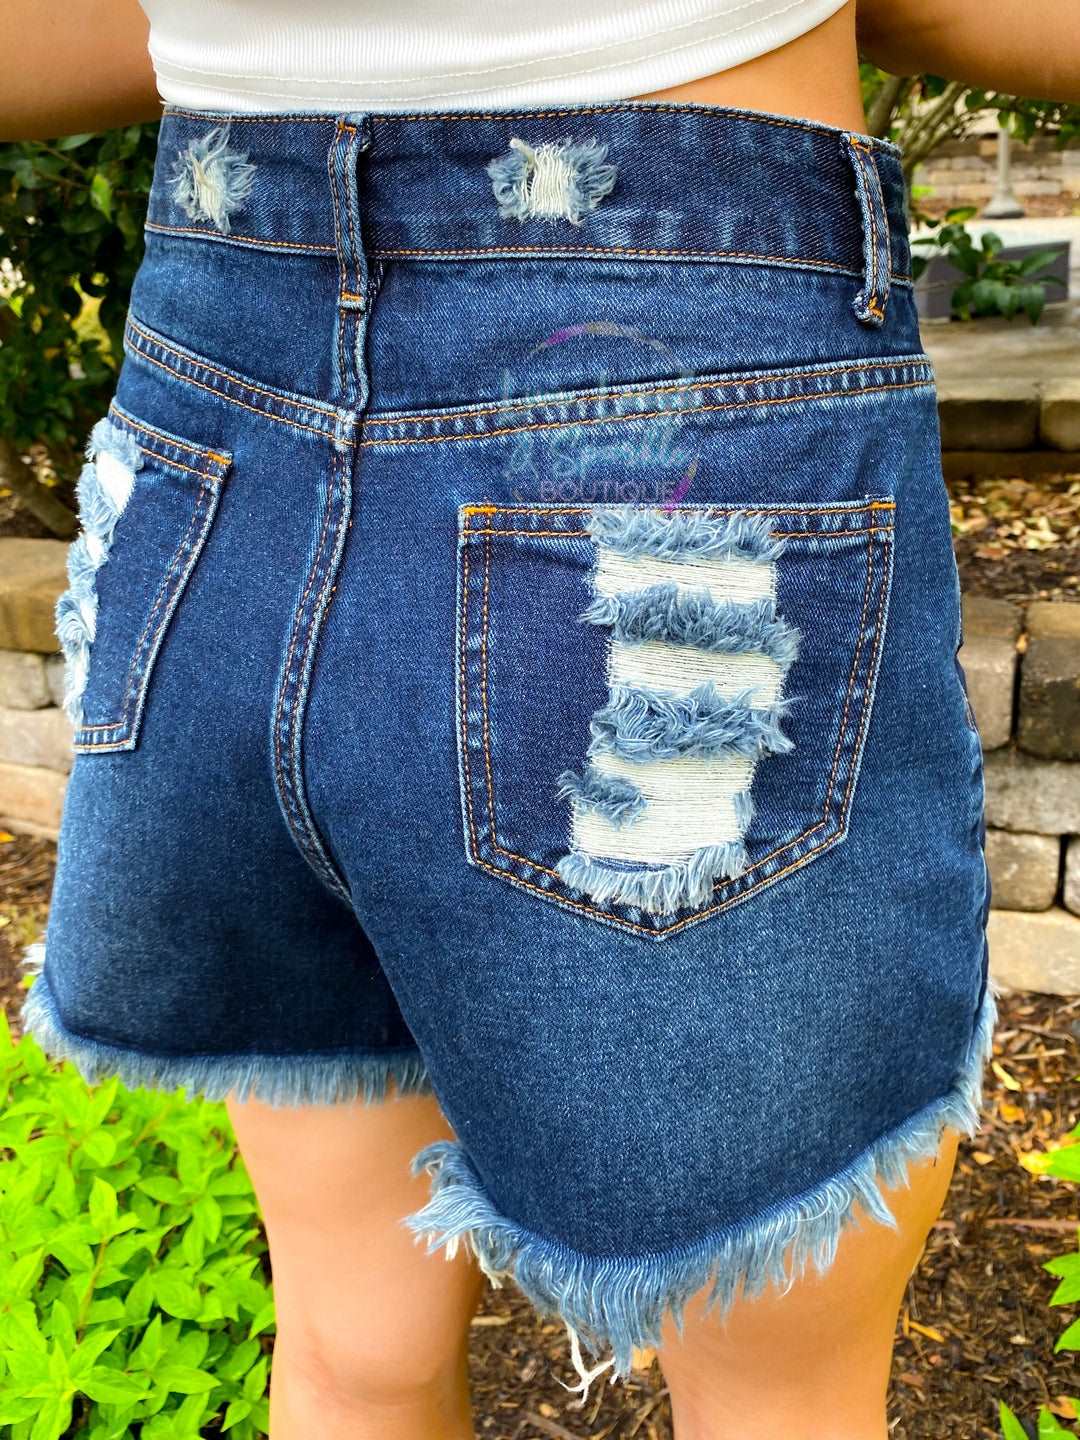 Back of shorts have distressed pockets. 